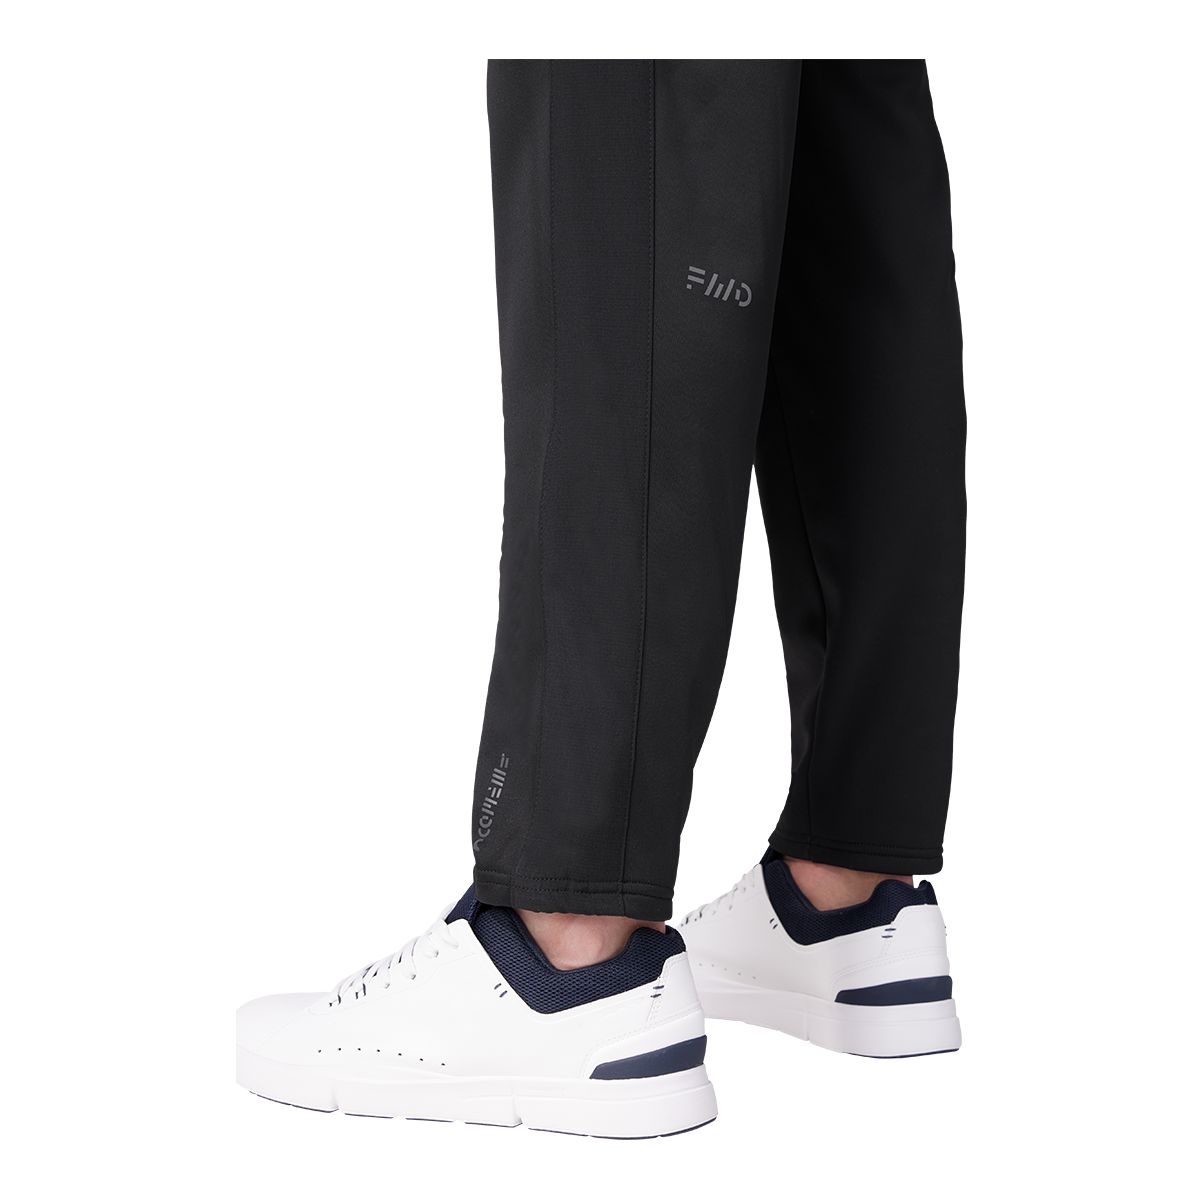 FWD Men's Outdoor Tapered Jogger Pants